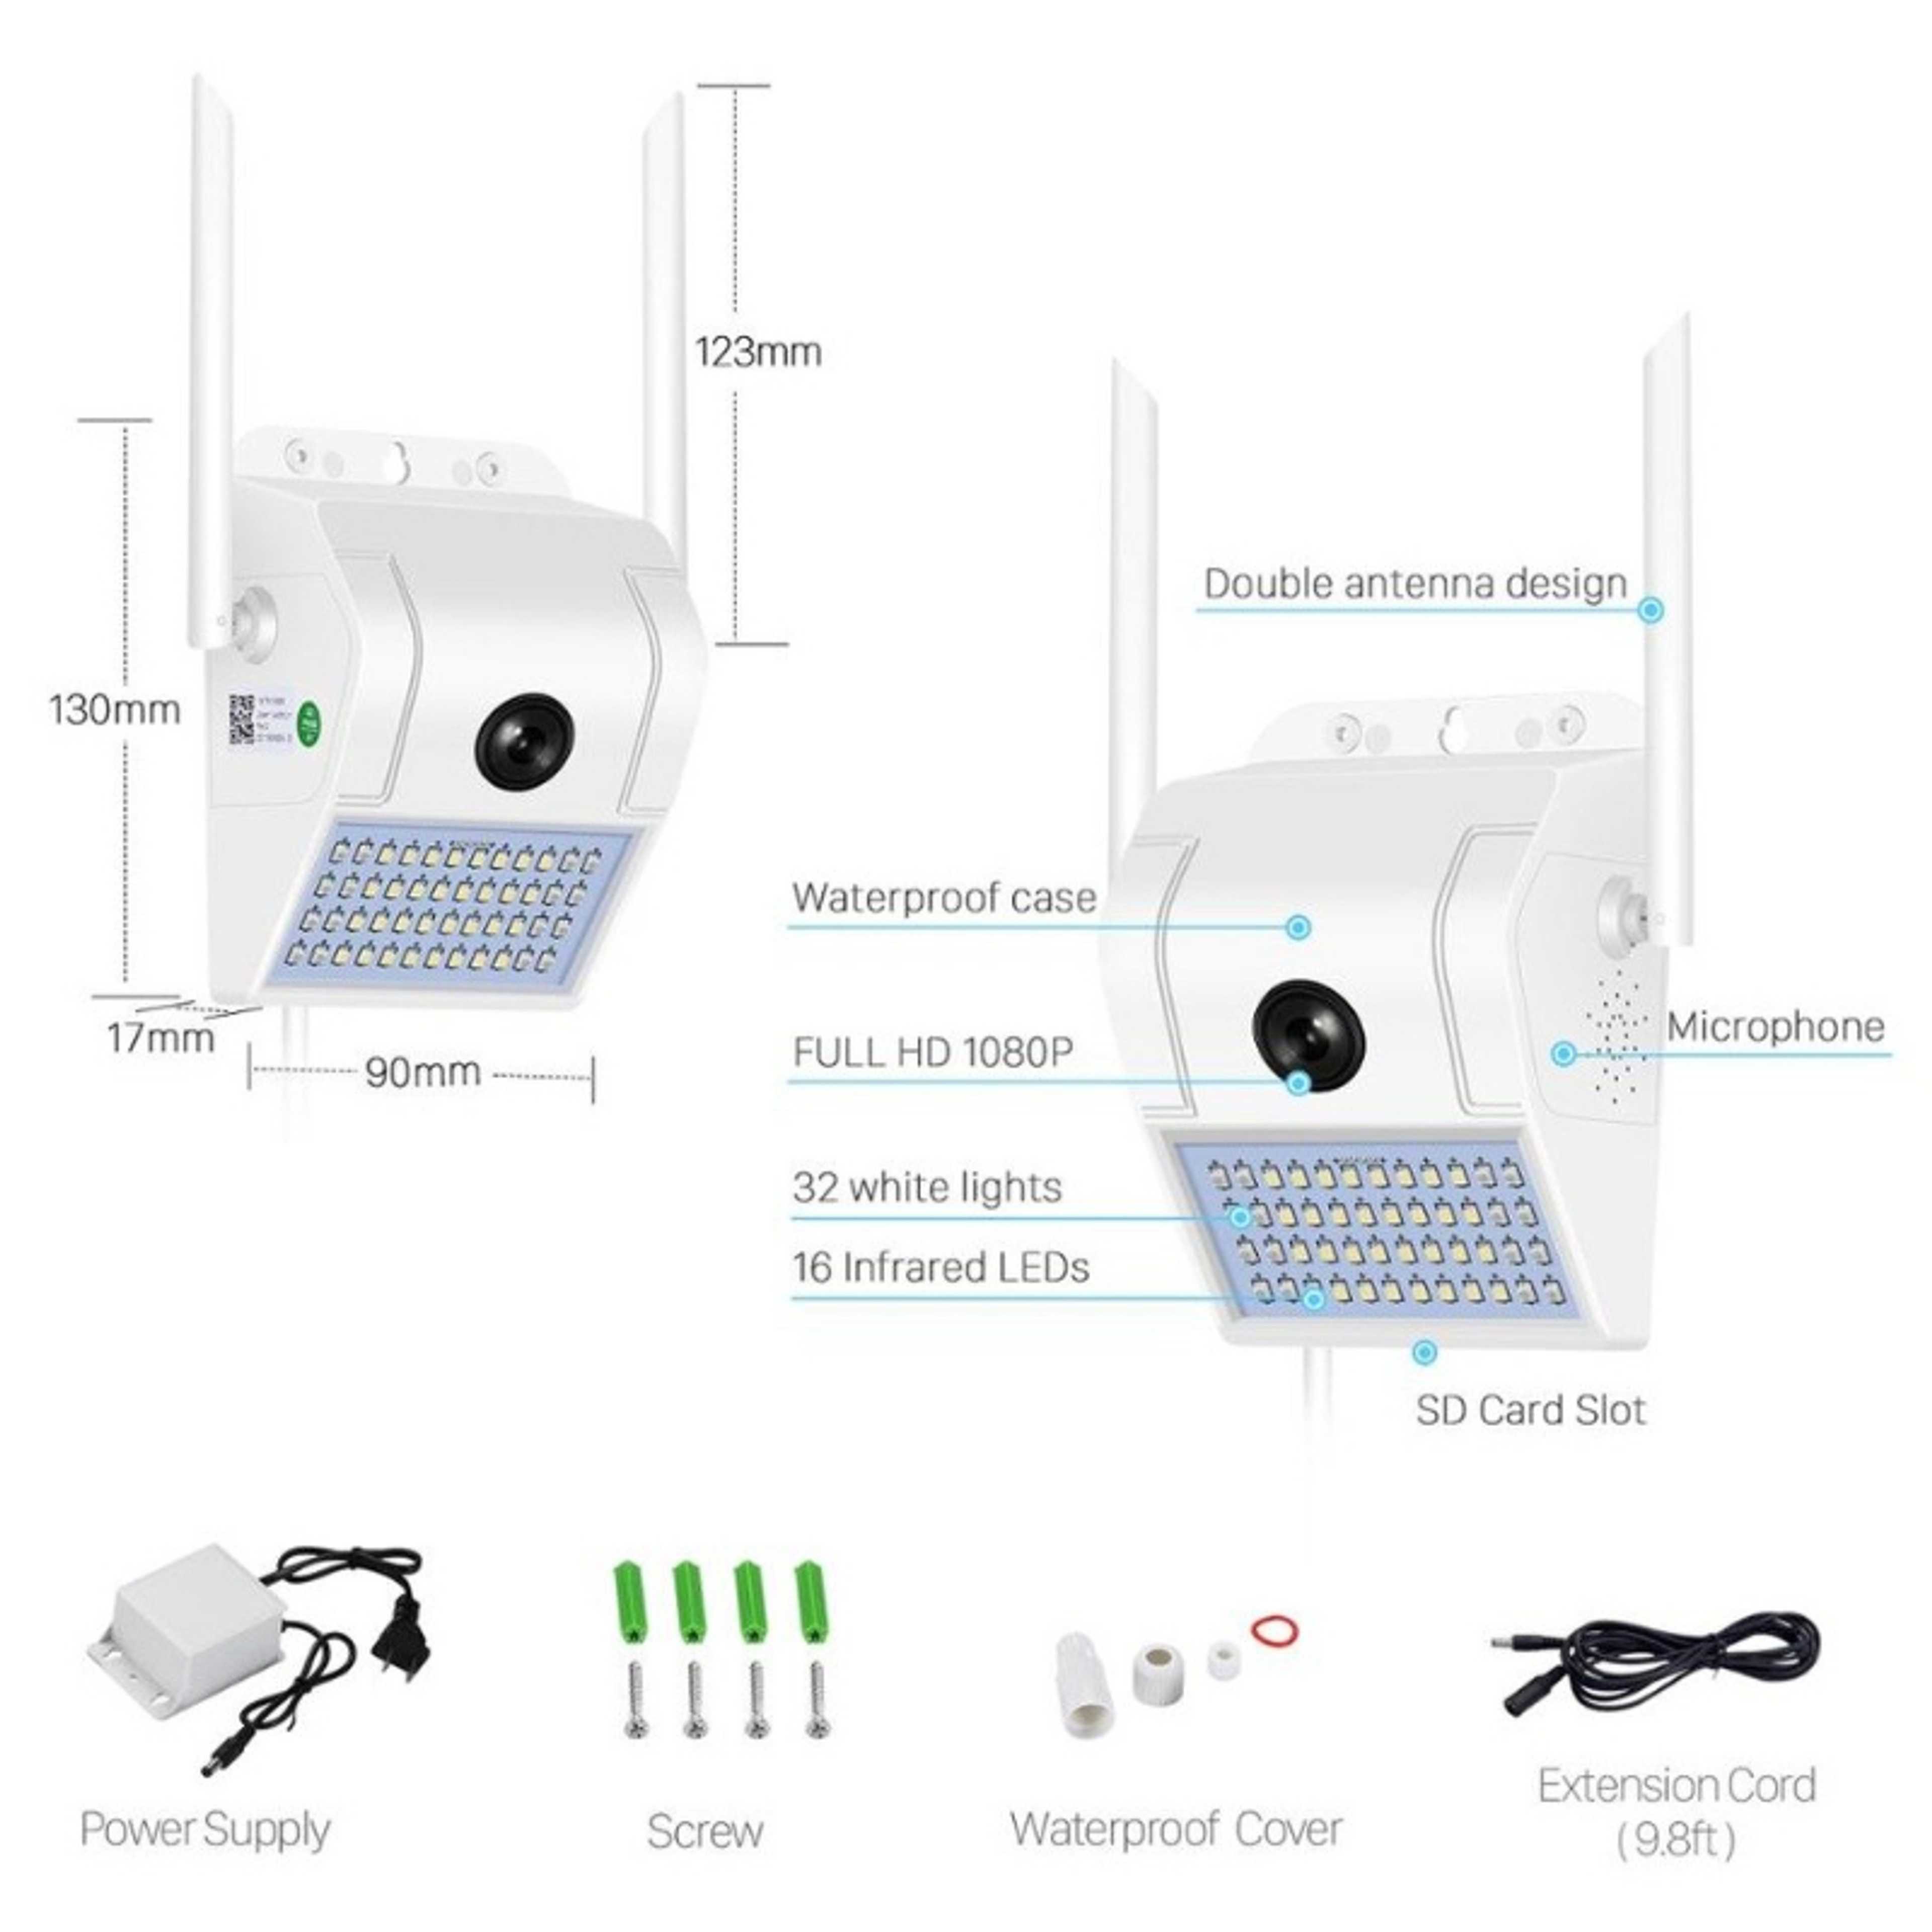 WiFi Wall Lamp Camera, HD 1080P Outdoor, Wireless CCTV Security Surveillance Camera - Waterproof - Night Vision - LED Lights - Two Way Audio - Motion Detection - SD Card Slot - V380 (White)